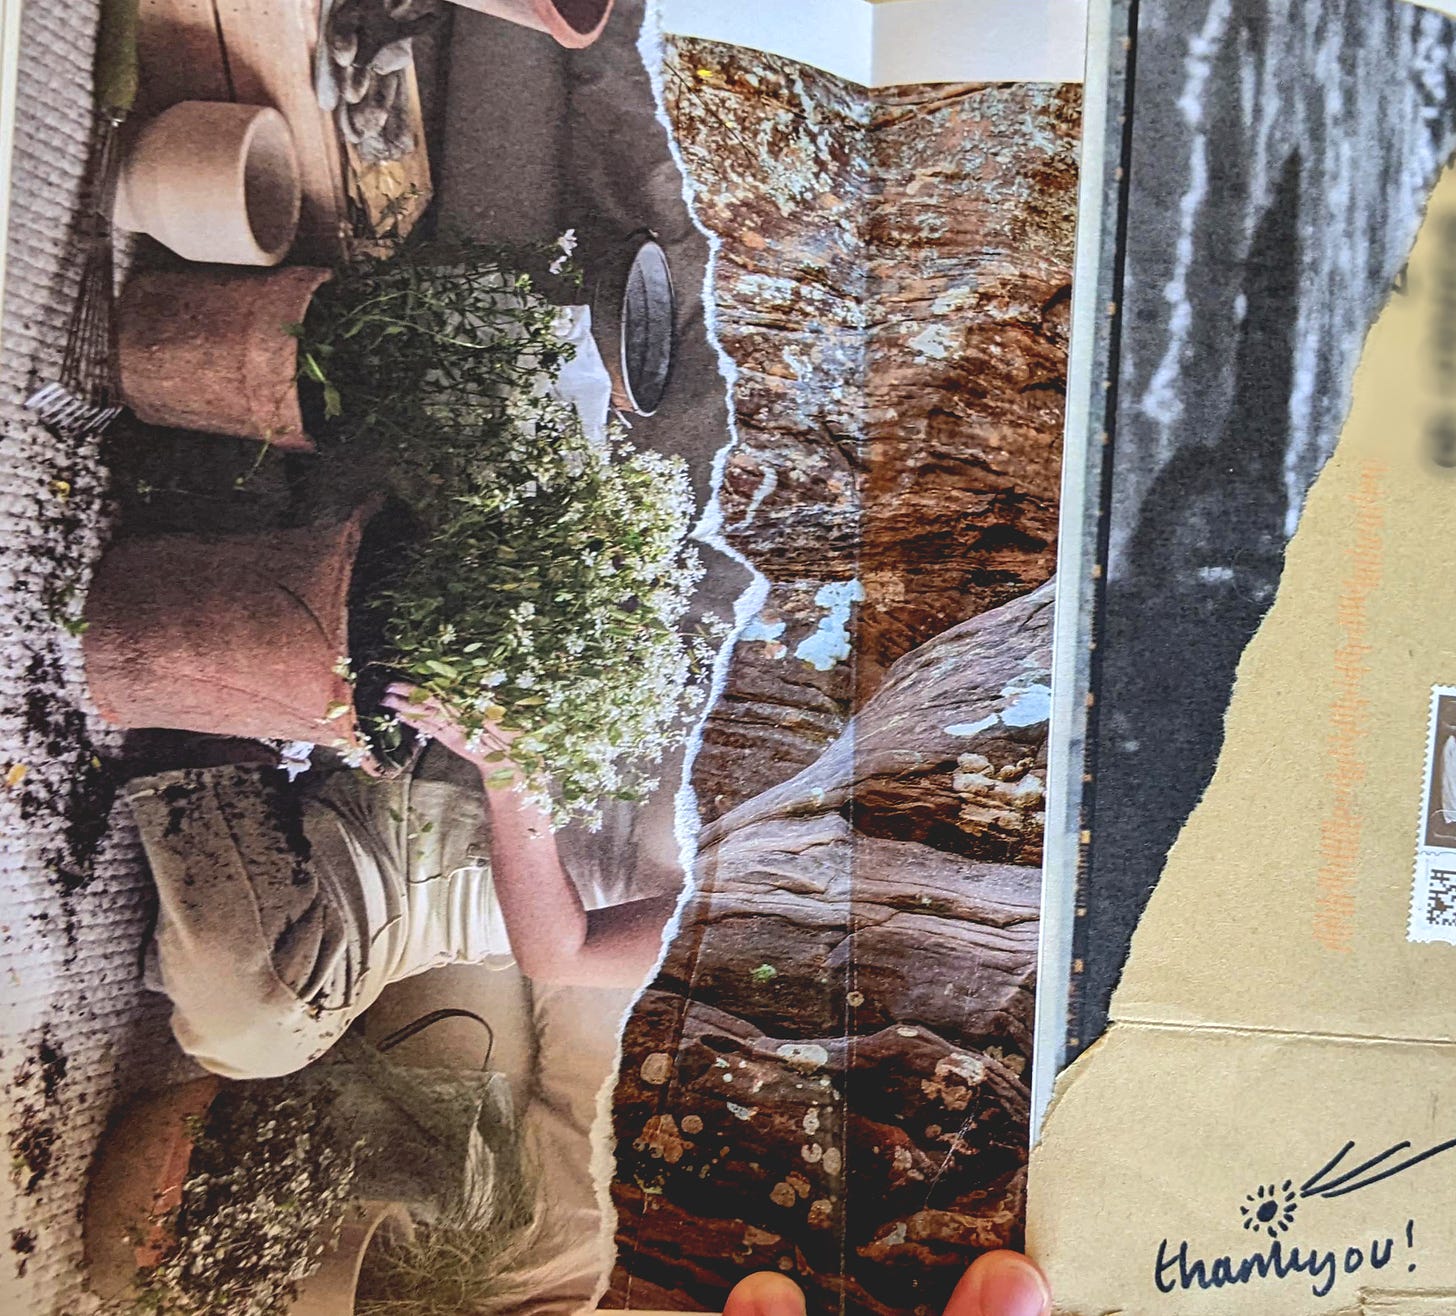 collage with image of a person repotting plants, close up of tree trunk, black and white sea, and an envelope